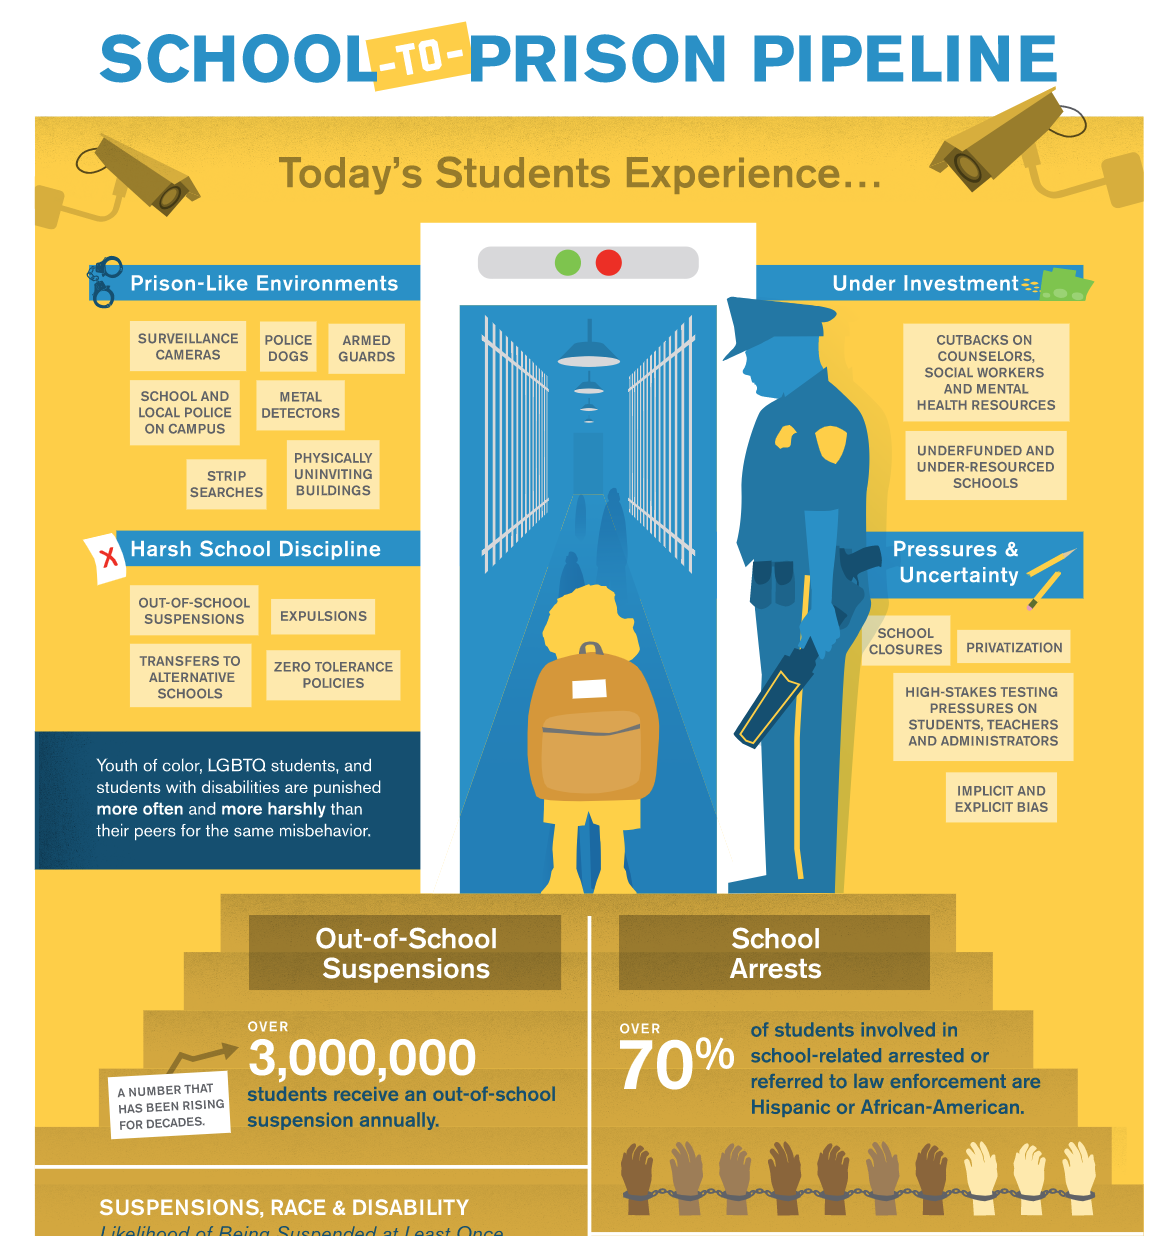 research questions on school to prison pipeline